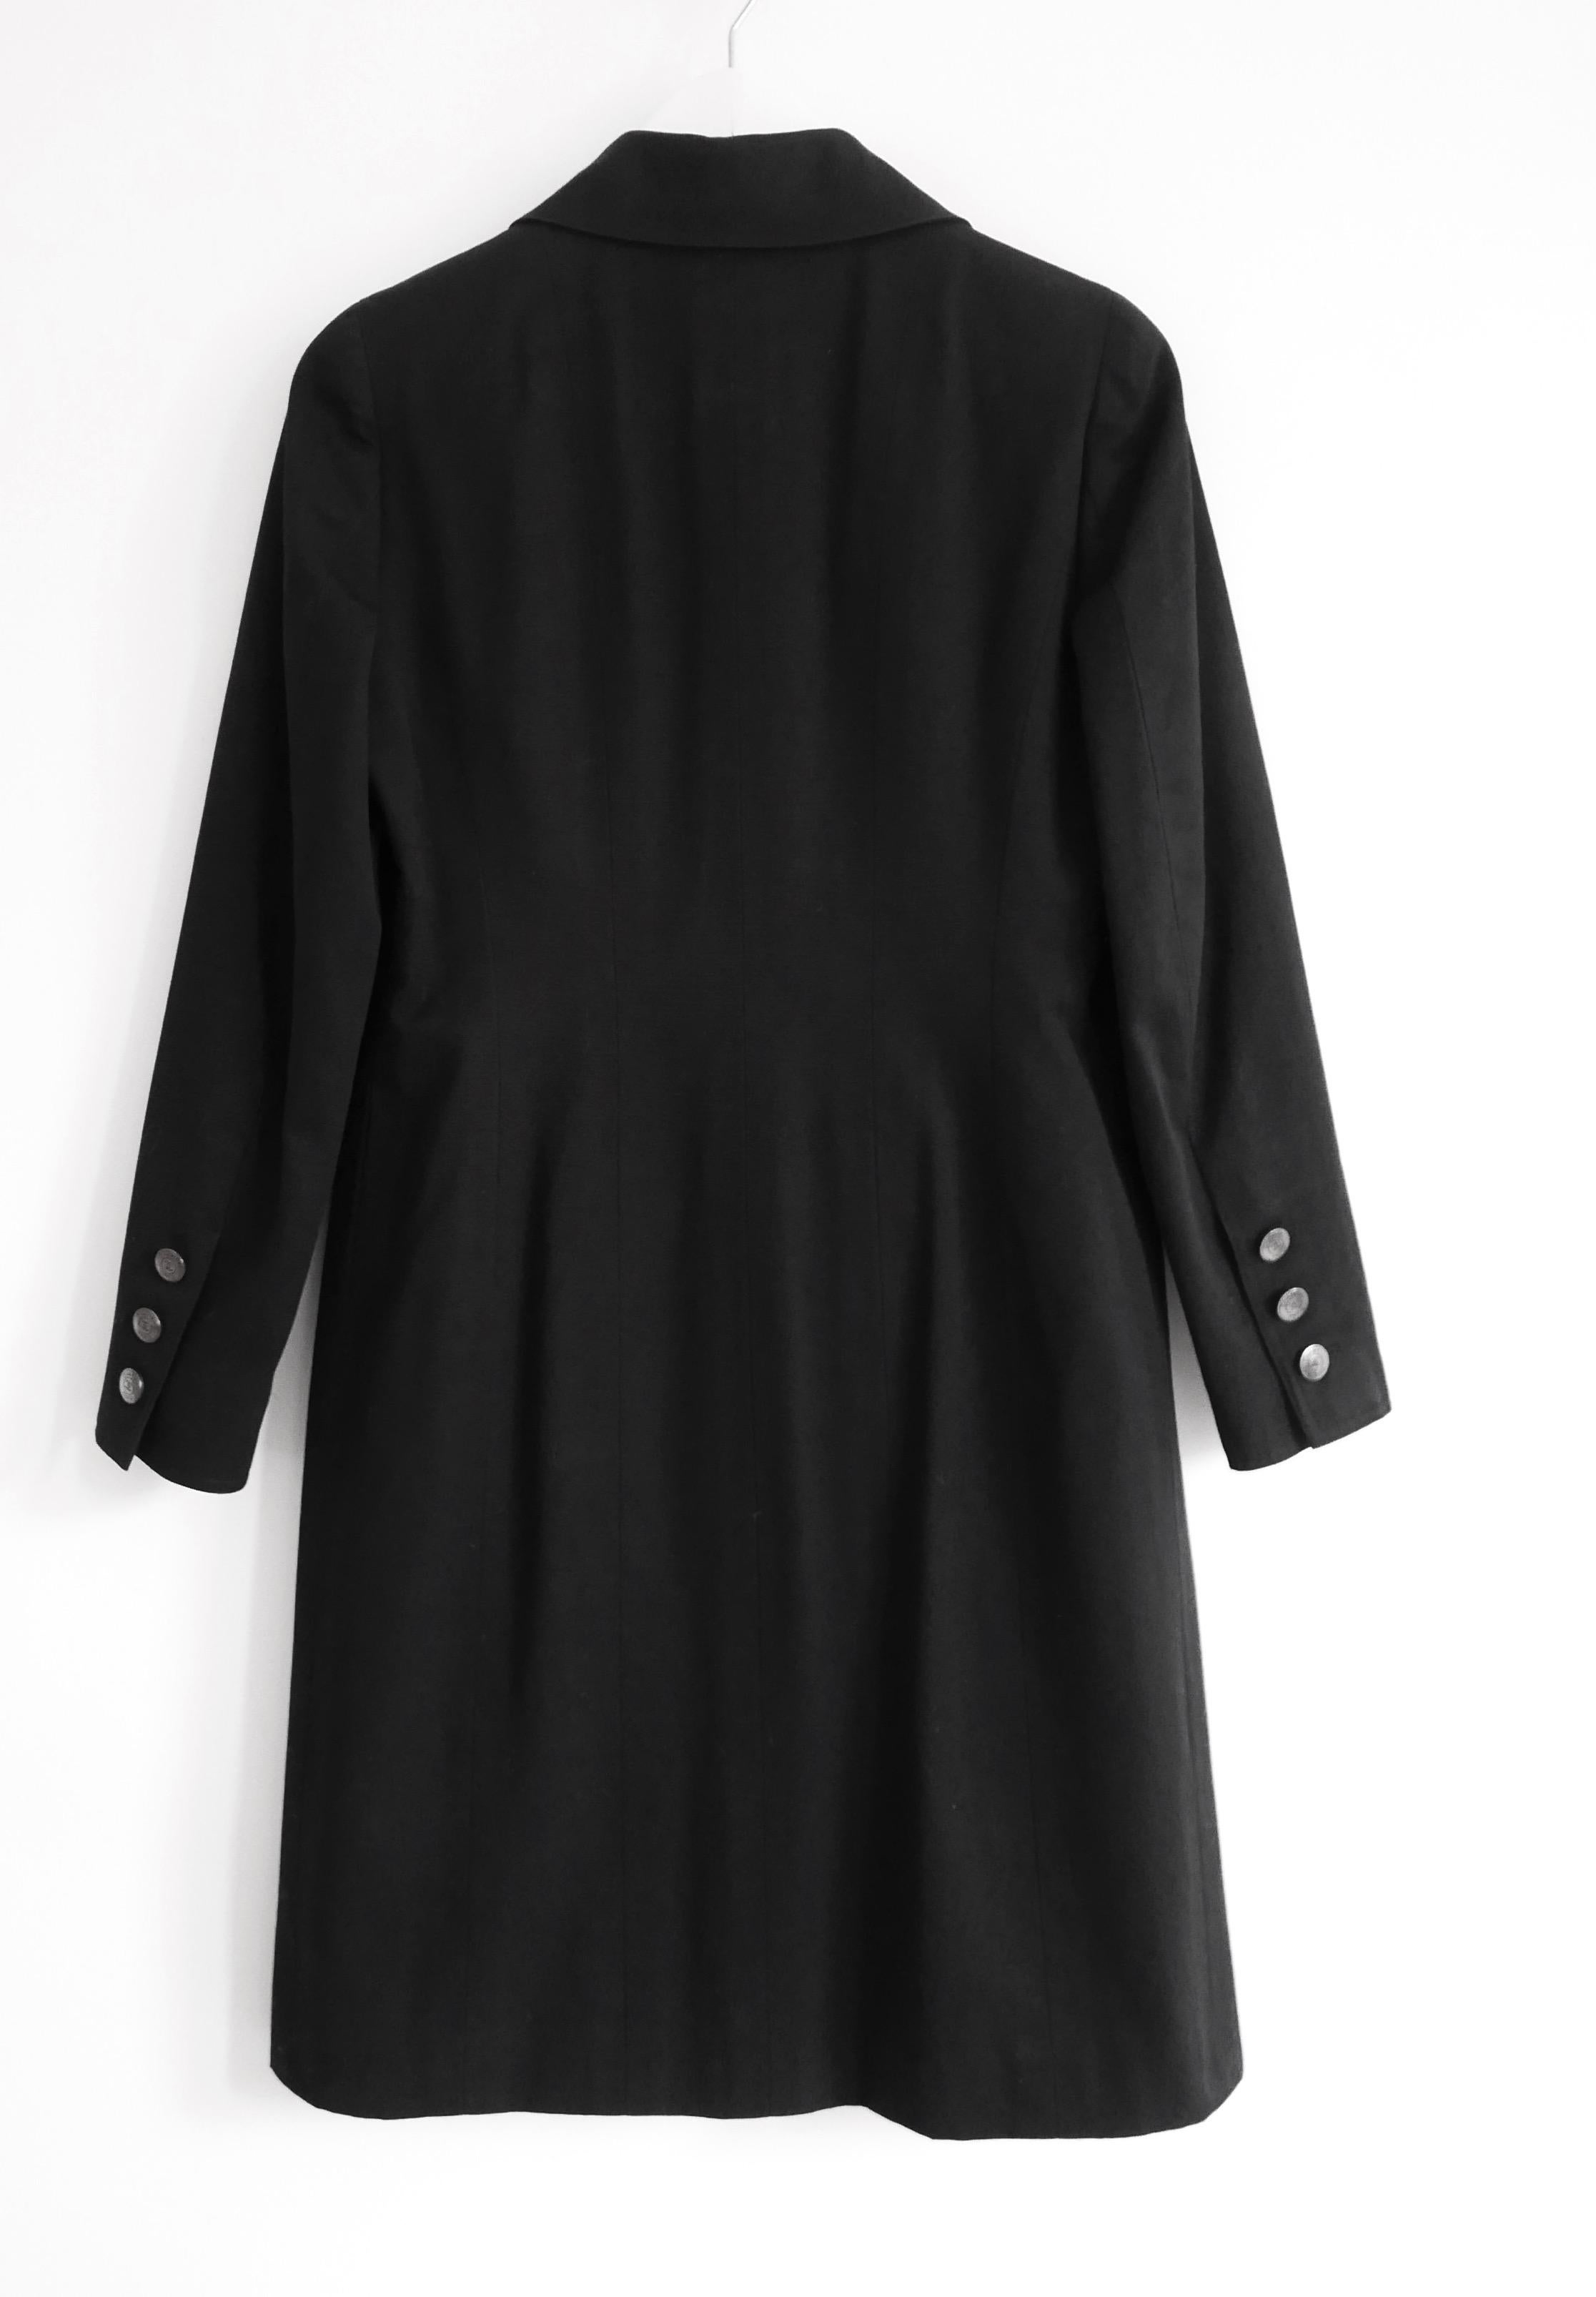 Chanel Cruise 1997 Long Black Coat w/Metal Buttons In Excellent Condition For Sale In London, GB